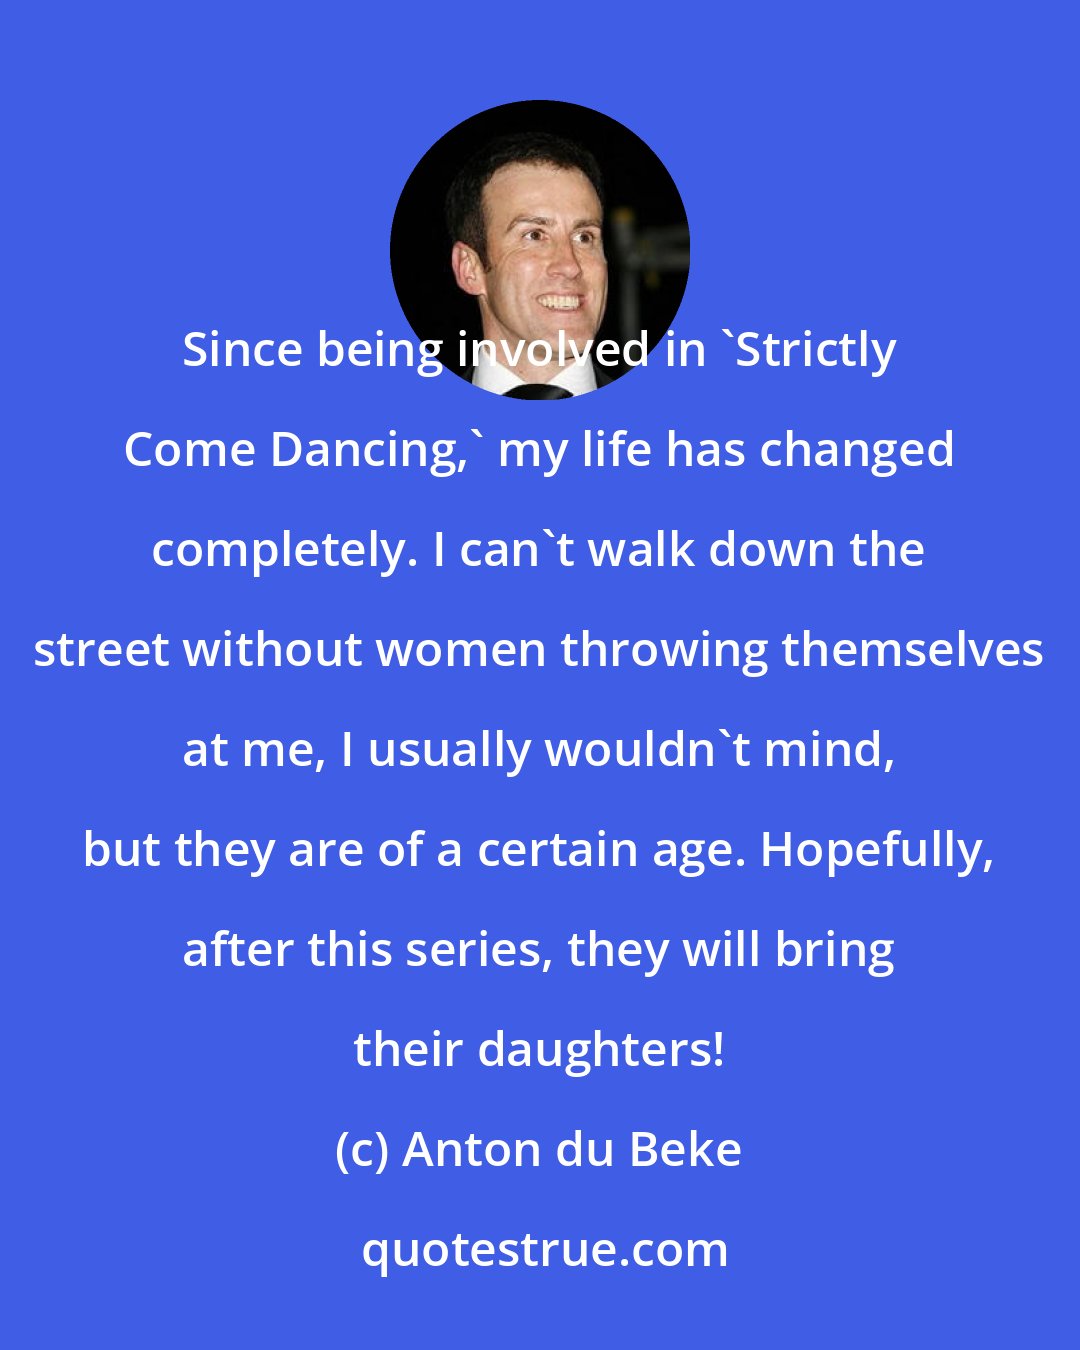 Anton du Beke: Since being involved in 'Strictly Come Dancing,' my life has changed completely. I can't walk down the street without women throwing themselves at me, I usually wouldn't mind, but they are of a certain age. Hopefully, after this series, they will bring their daughters!